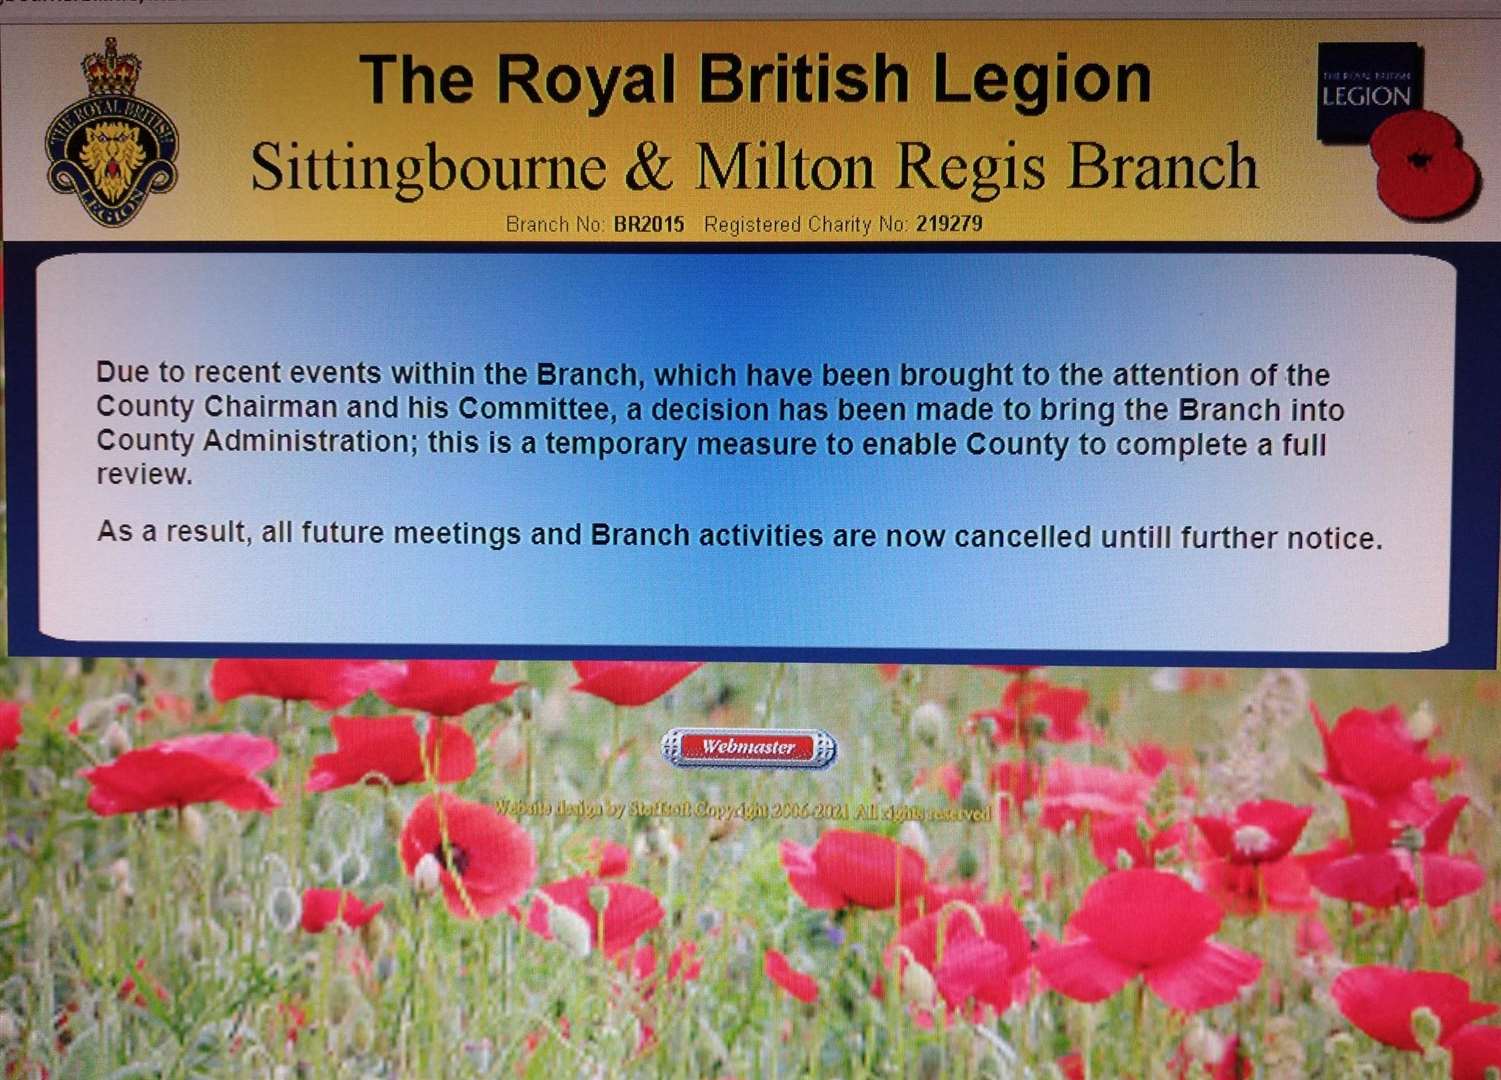 The website of the Sittingbourne branch of the Royal British Legion